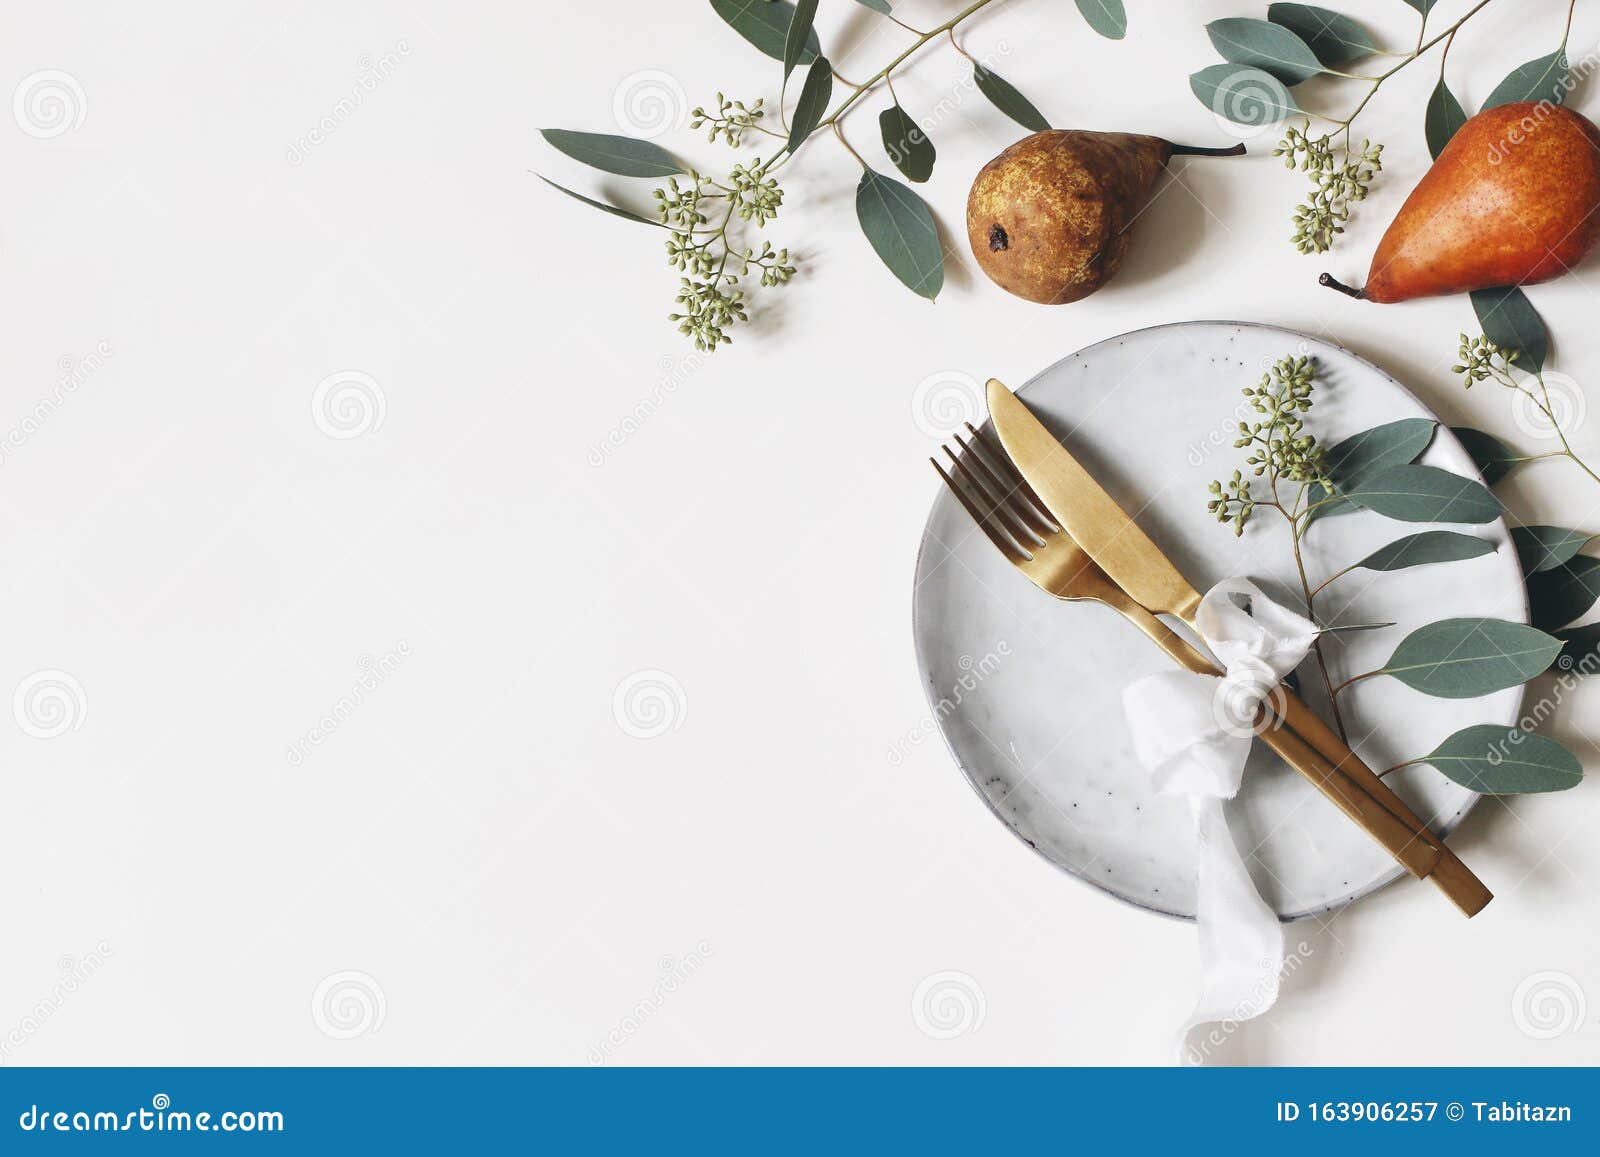 autumn thanksgiving table place setting. golden cutlery, porcelain plate, berry eucalyptus leaves and branches, silk